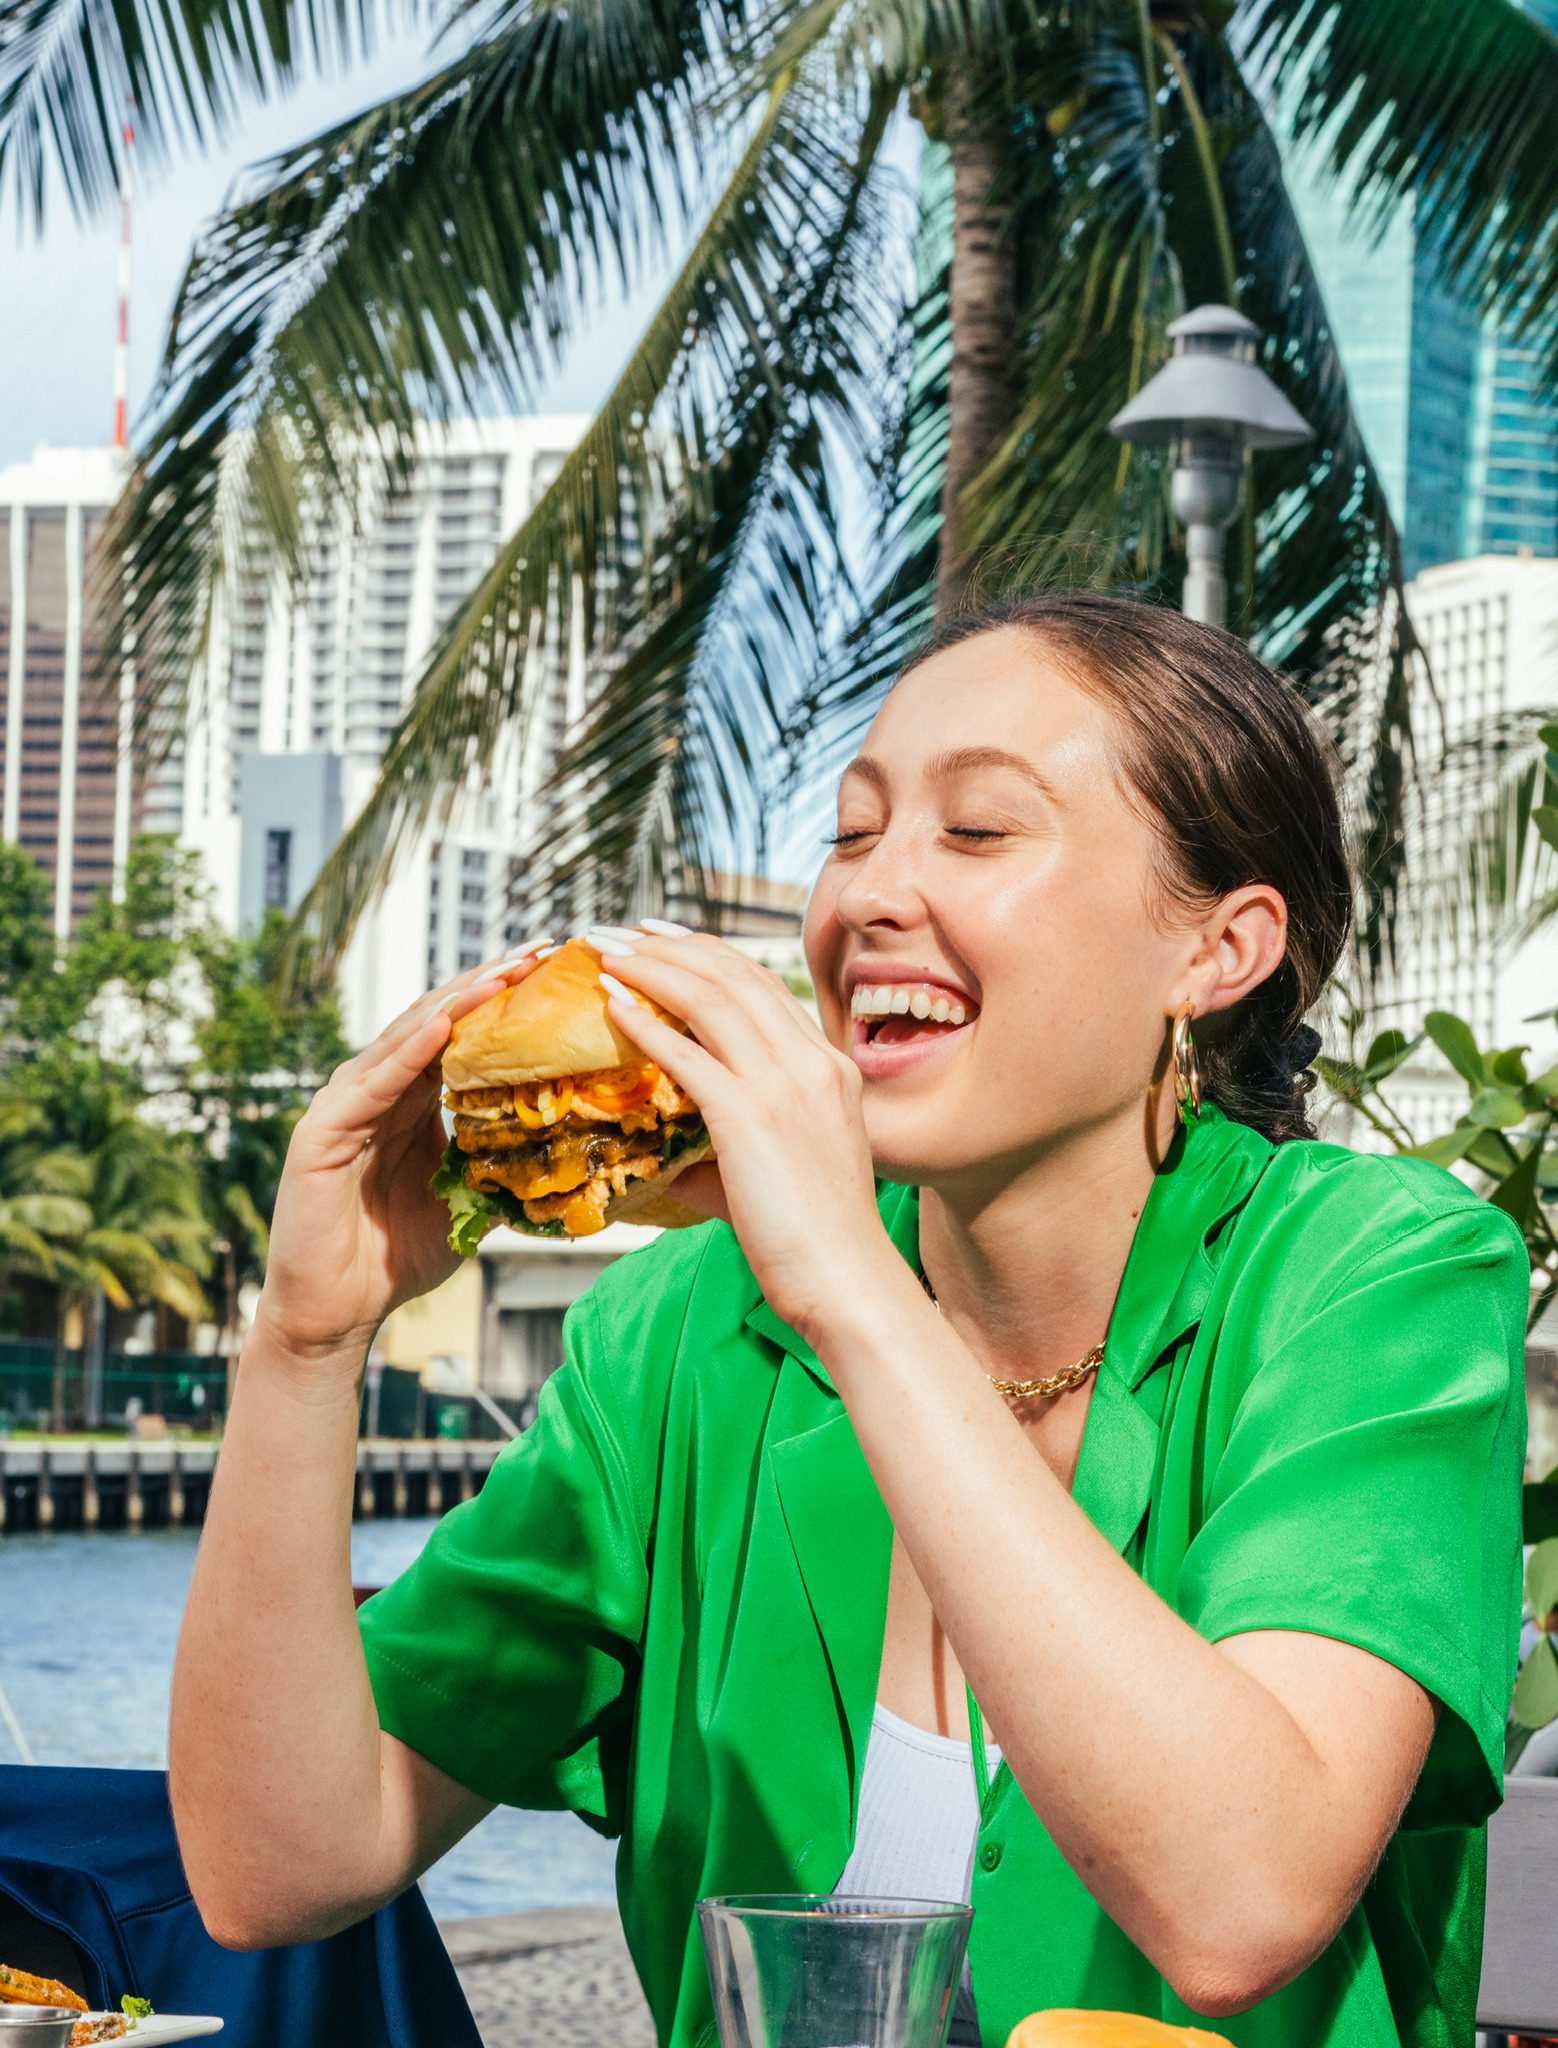 A brown haired woman is ready to bite into a delicious burger.